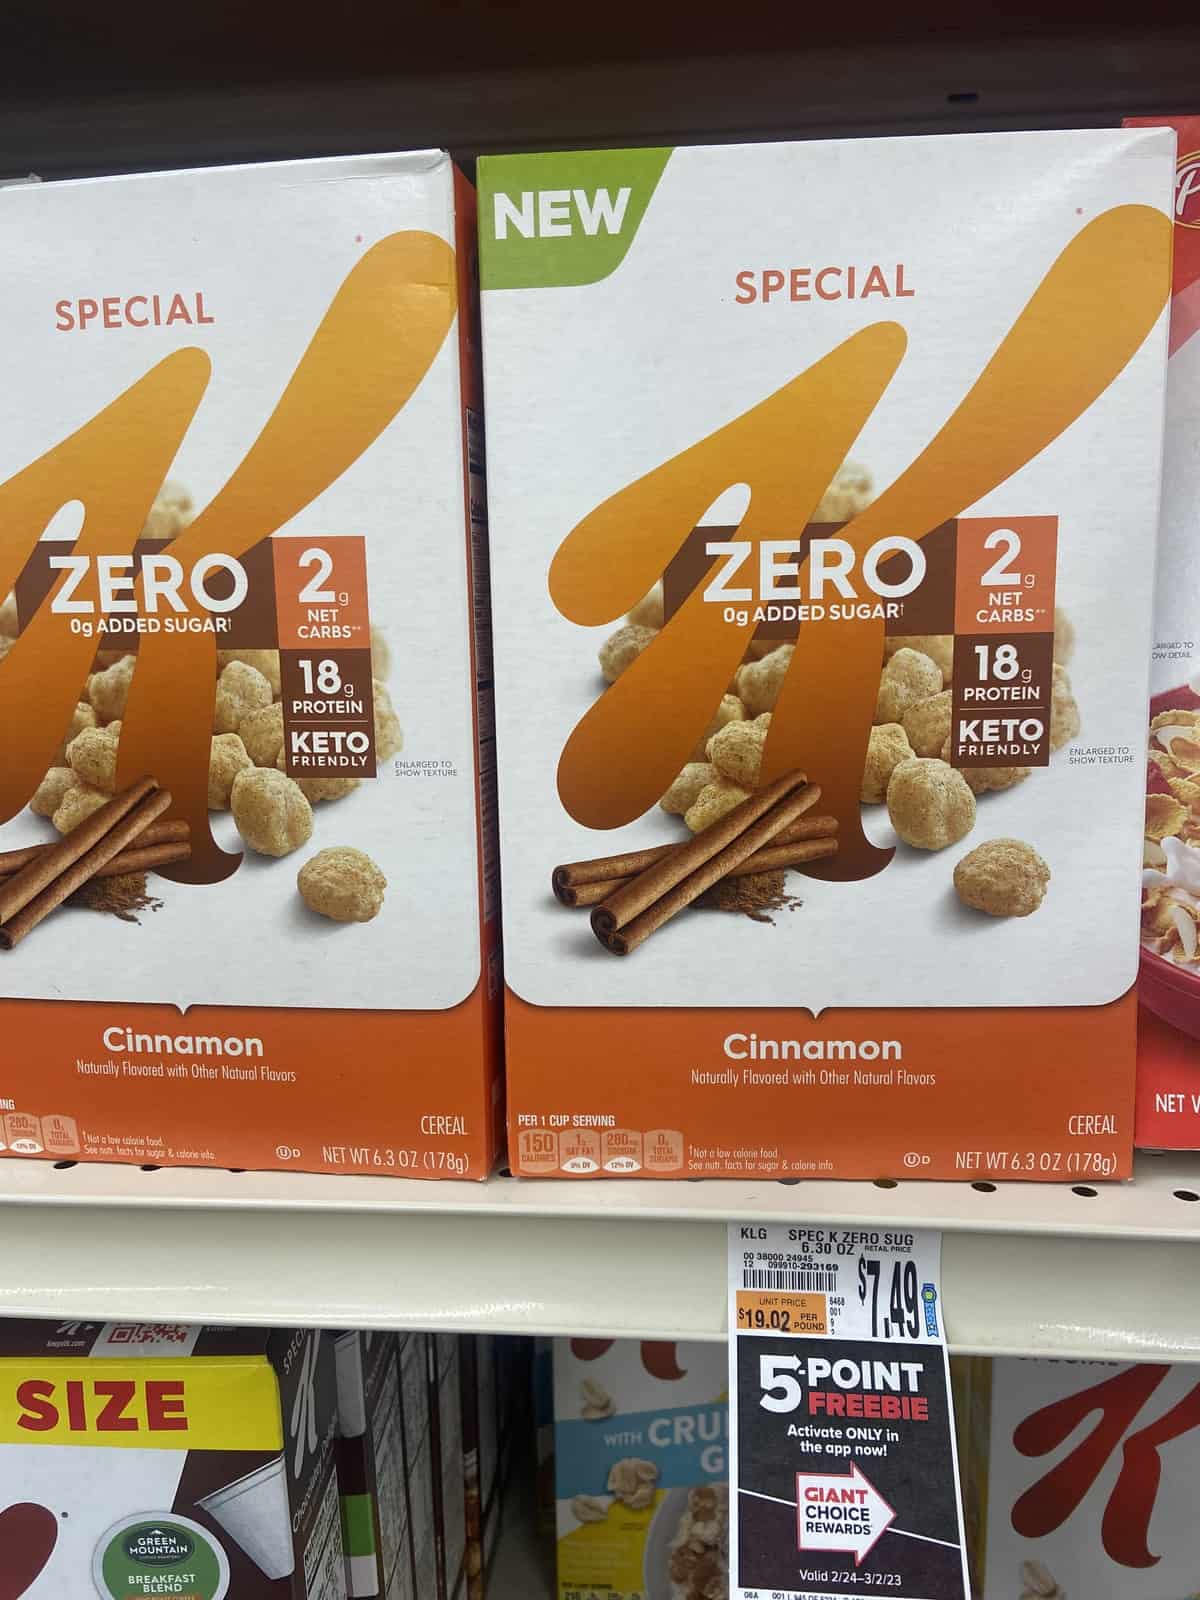 Giant-Deal-on-Kelloggs-Special-K-Zero-Sugar-Cereal